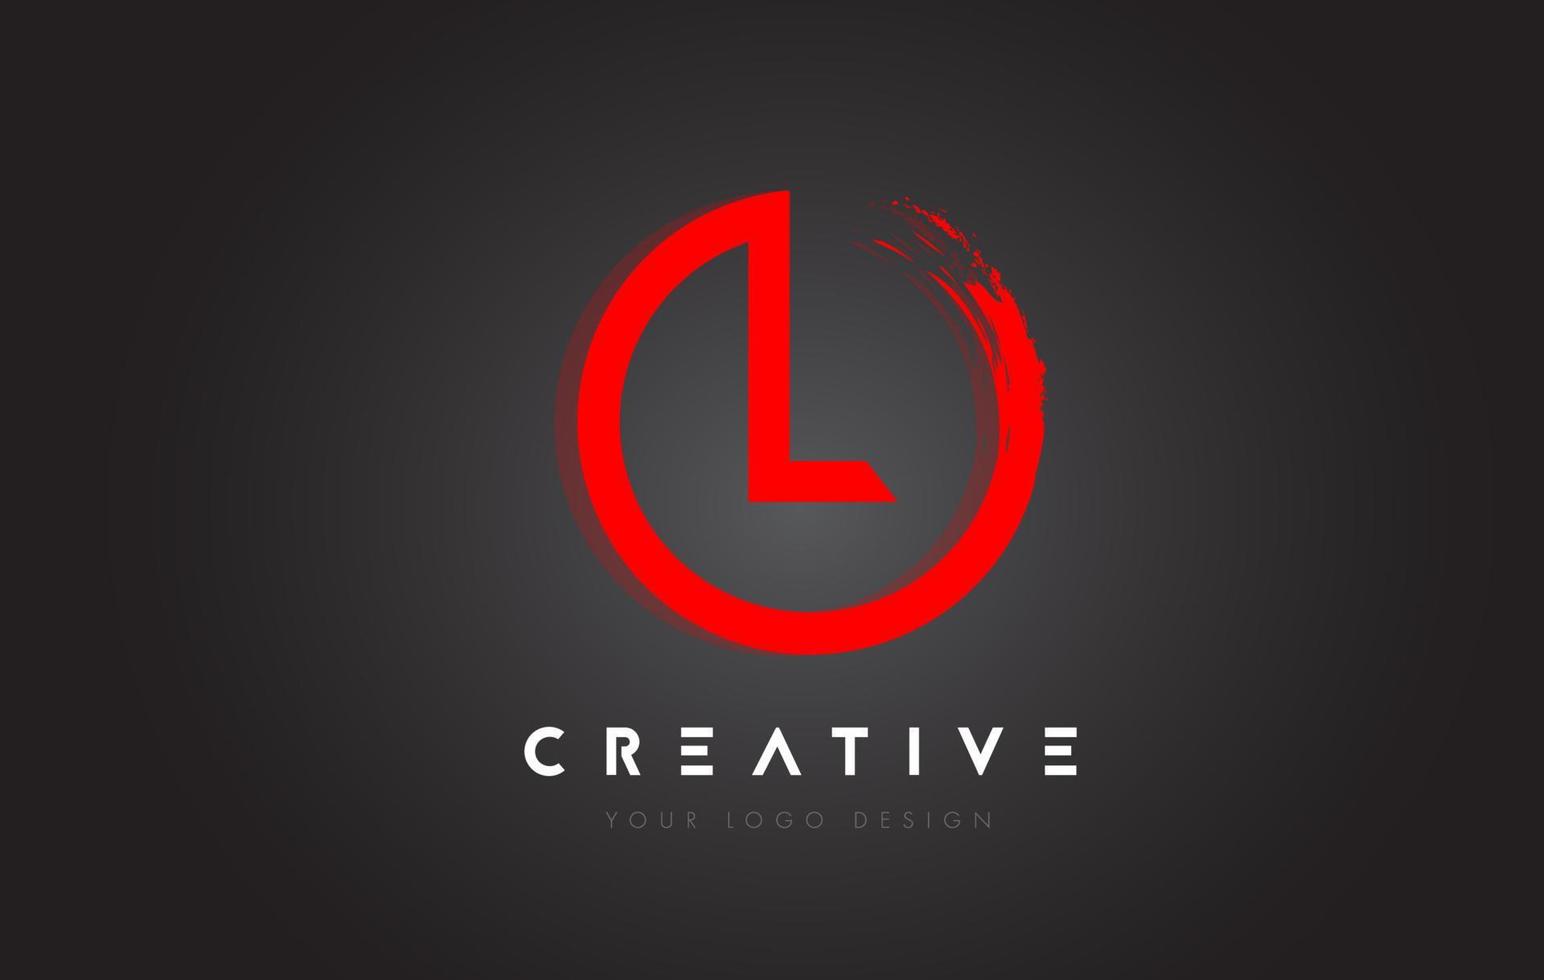 Red L Circular Letter Logo with Circle Brush Design and Black Background. vector